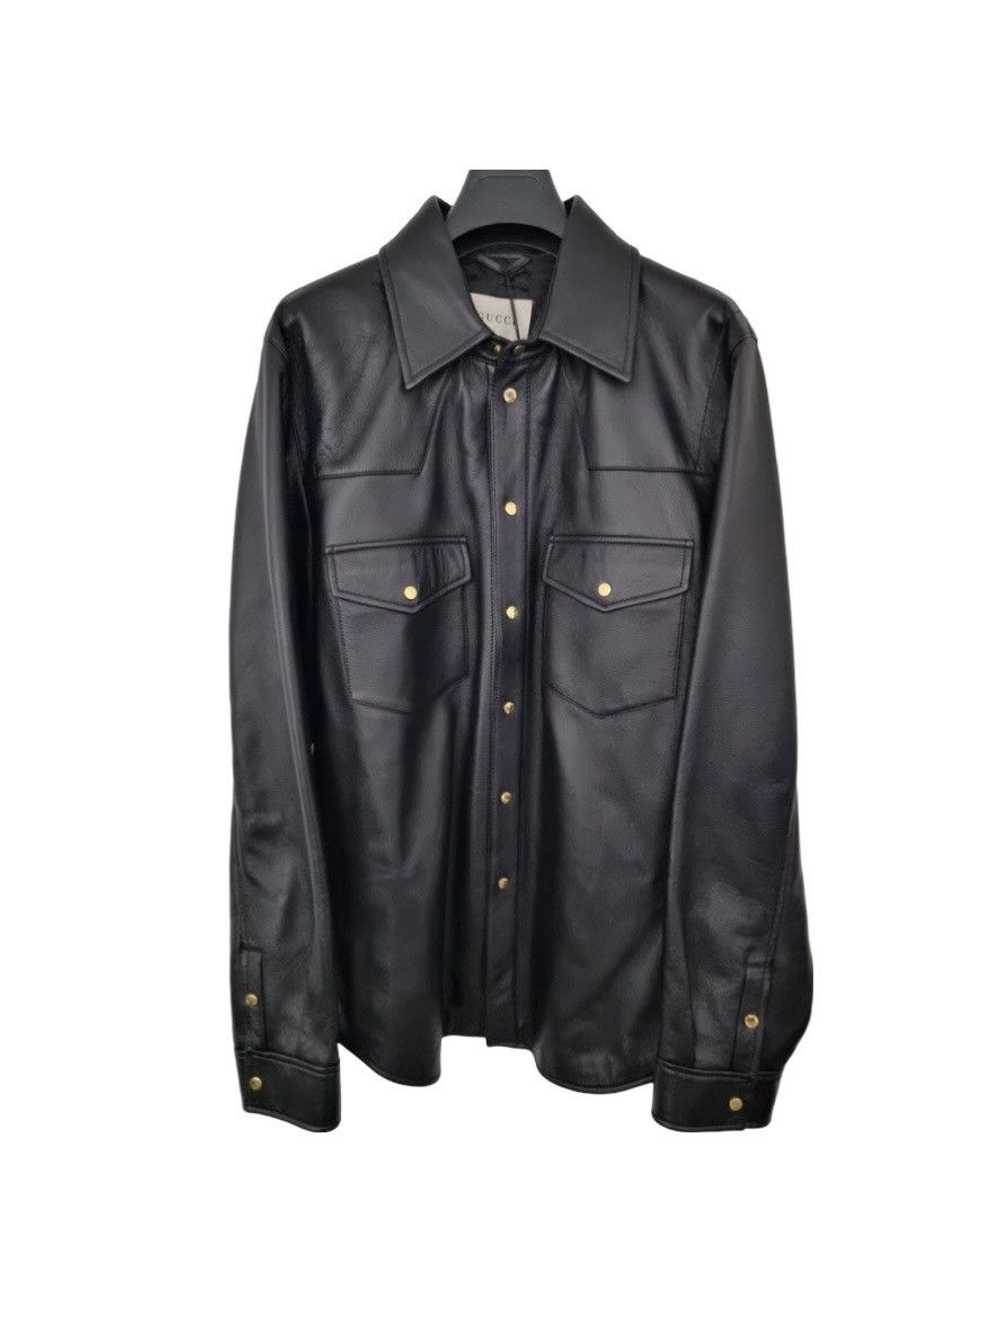 Gucci Gucci Leather Logo Jacket $3500 retail - image 1